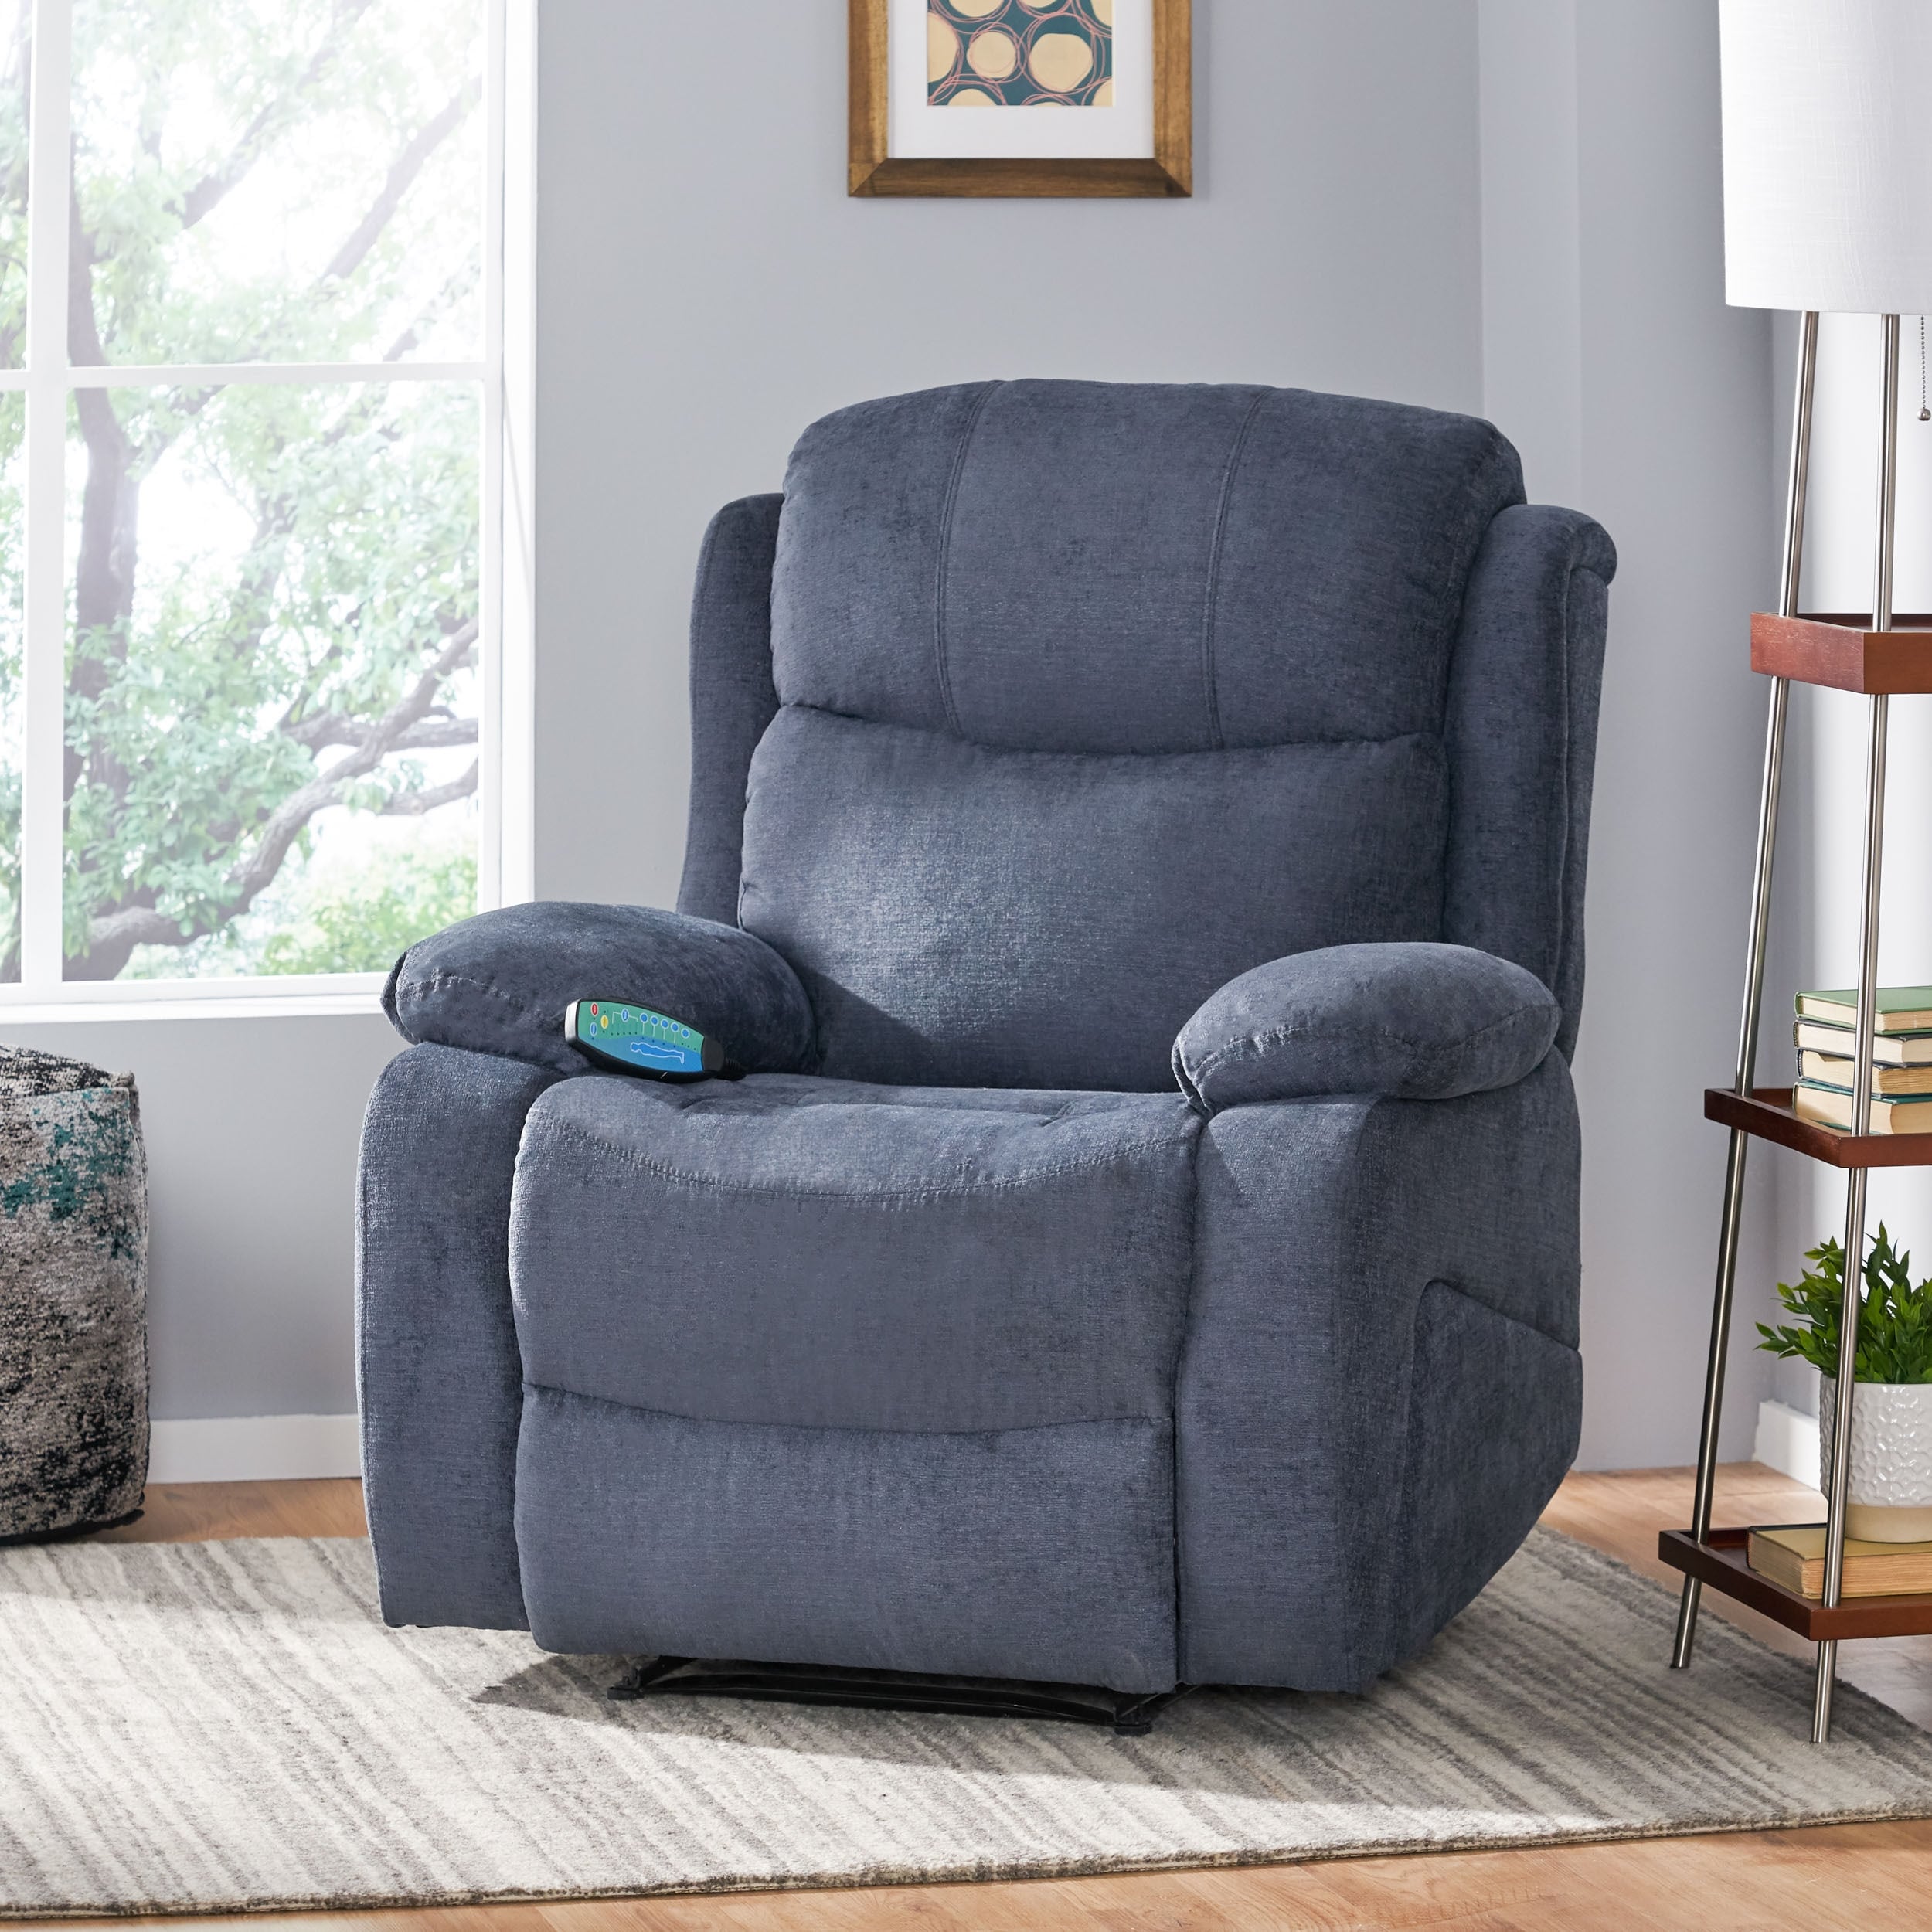 https://ak1.ostkcdn.com/images/products/is/images/direct/92eb9d6c9d2f5f774772f5cb59c8992d6e31f350/Porterdale-Indoor-Pillow-Tufted-Massage-Recliner-by-Christopher-Knight-Home.jpg